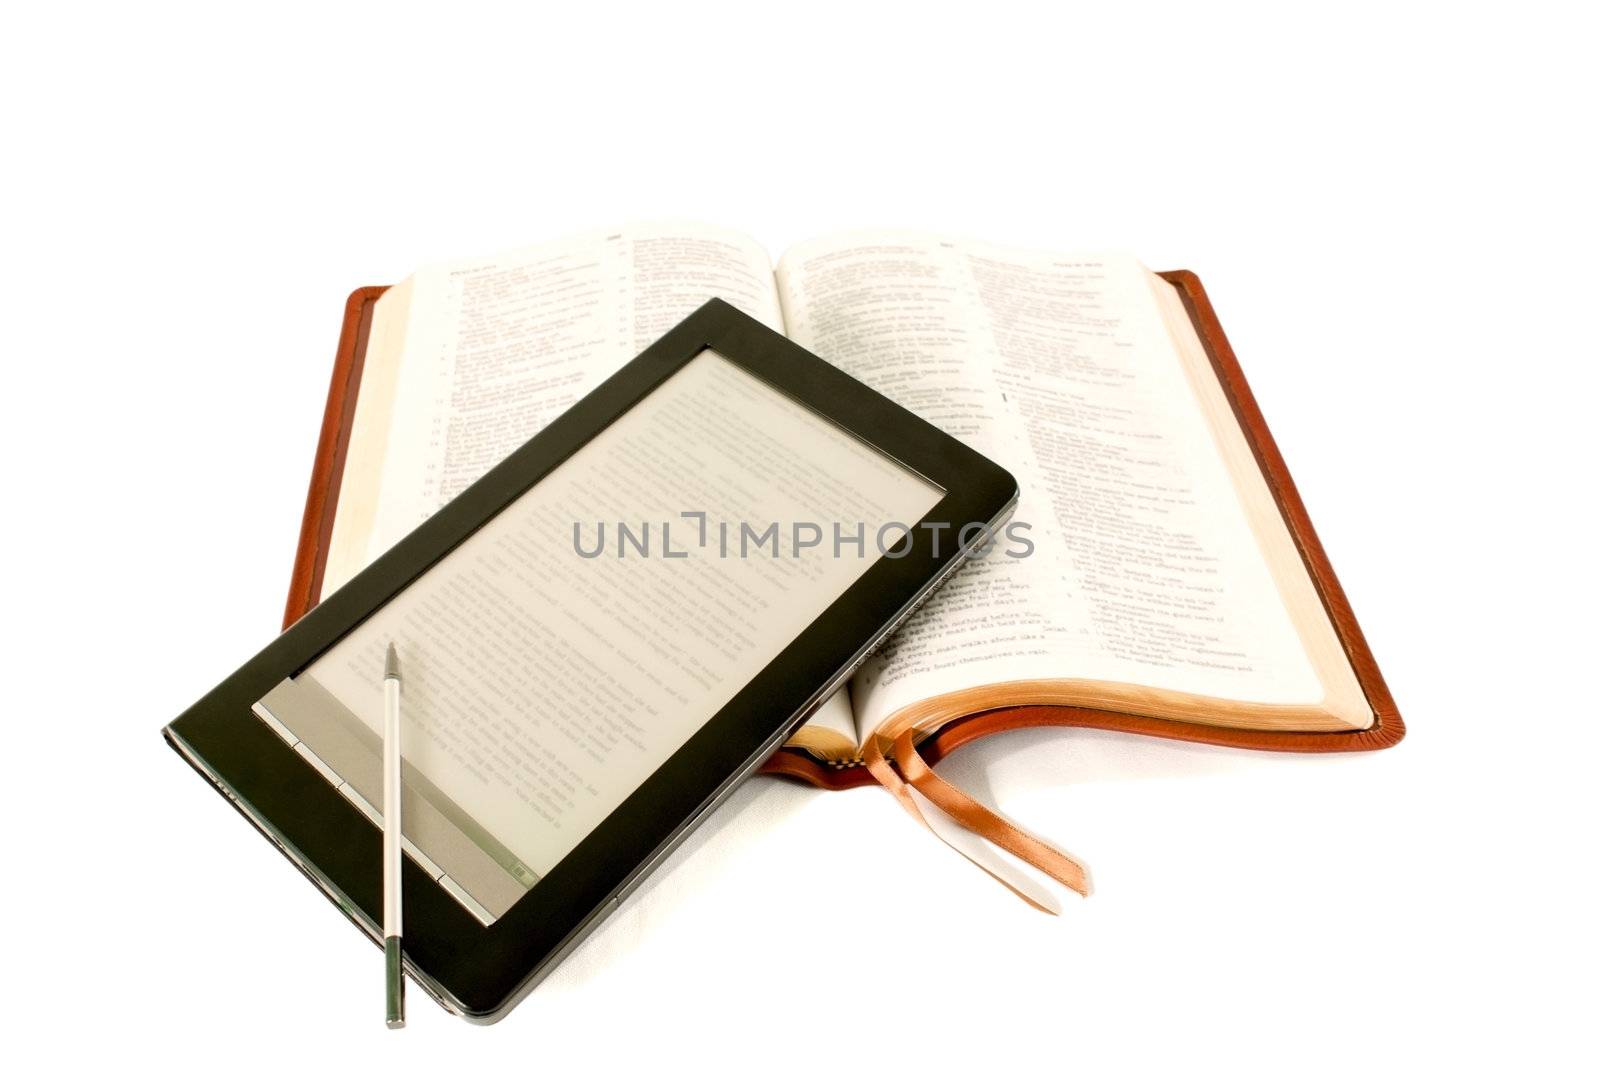 Electronic book reader laying on the Bible